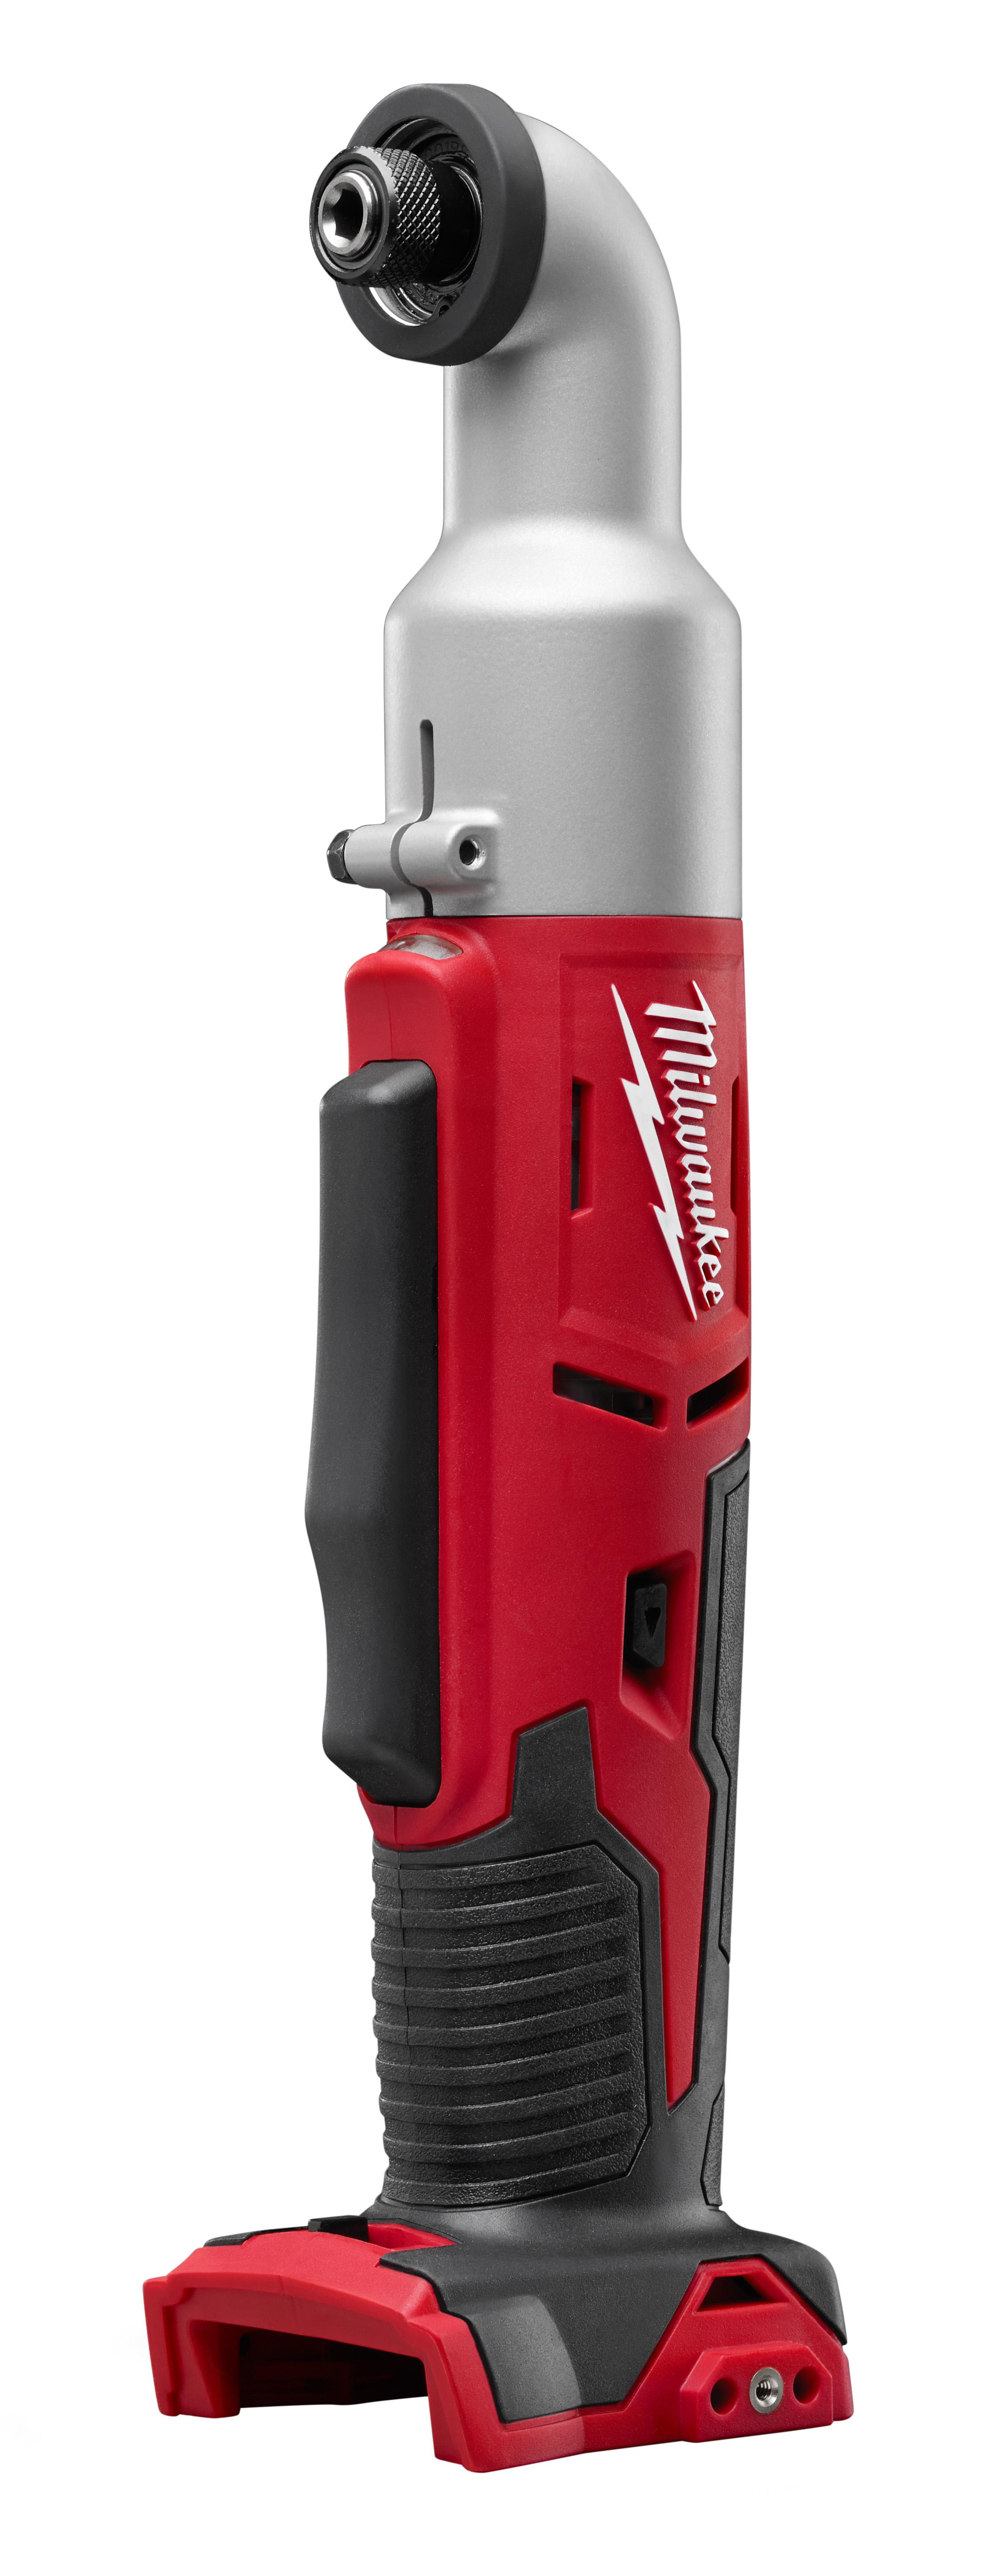 Milwaukee® M18™ 2657-20 2-Speed Compact Cordless Impact Driver, 1/4 in Hex/Straight Drive, 3450 bpm, 1500 in-lb Torque, 18 VAC, 5-1/2 in OAL